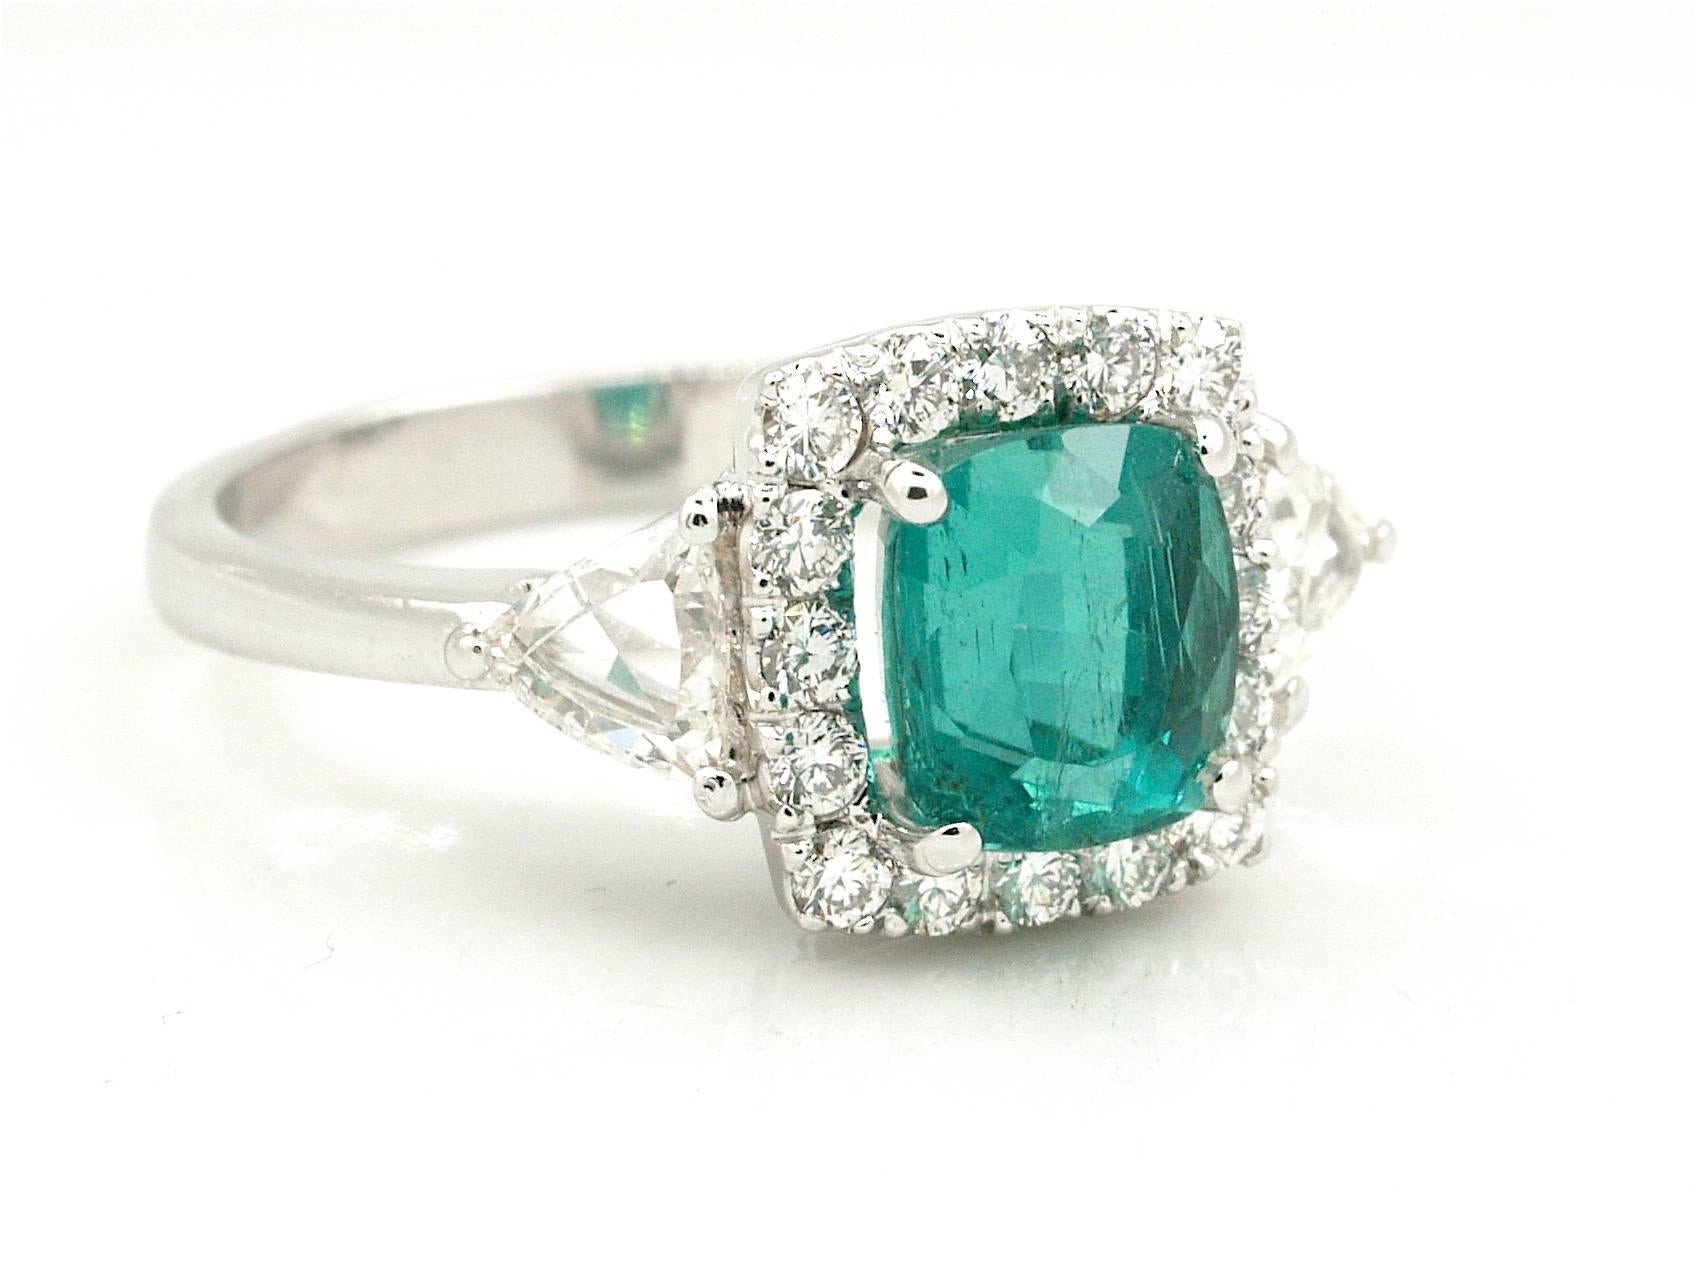 This gorgeous ring is centered with 1 genuine cushion cut emerald weighting 1.77ct, prong set,  It is flanked by a row air of brilliants cut diamonds and 2 trillion cut diamonds cumulatively weighing 0.82 cts, graded G-H color and VS clarity. This